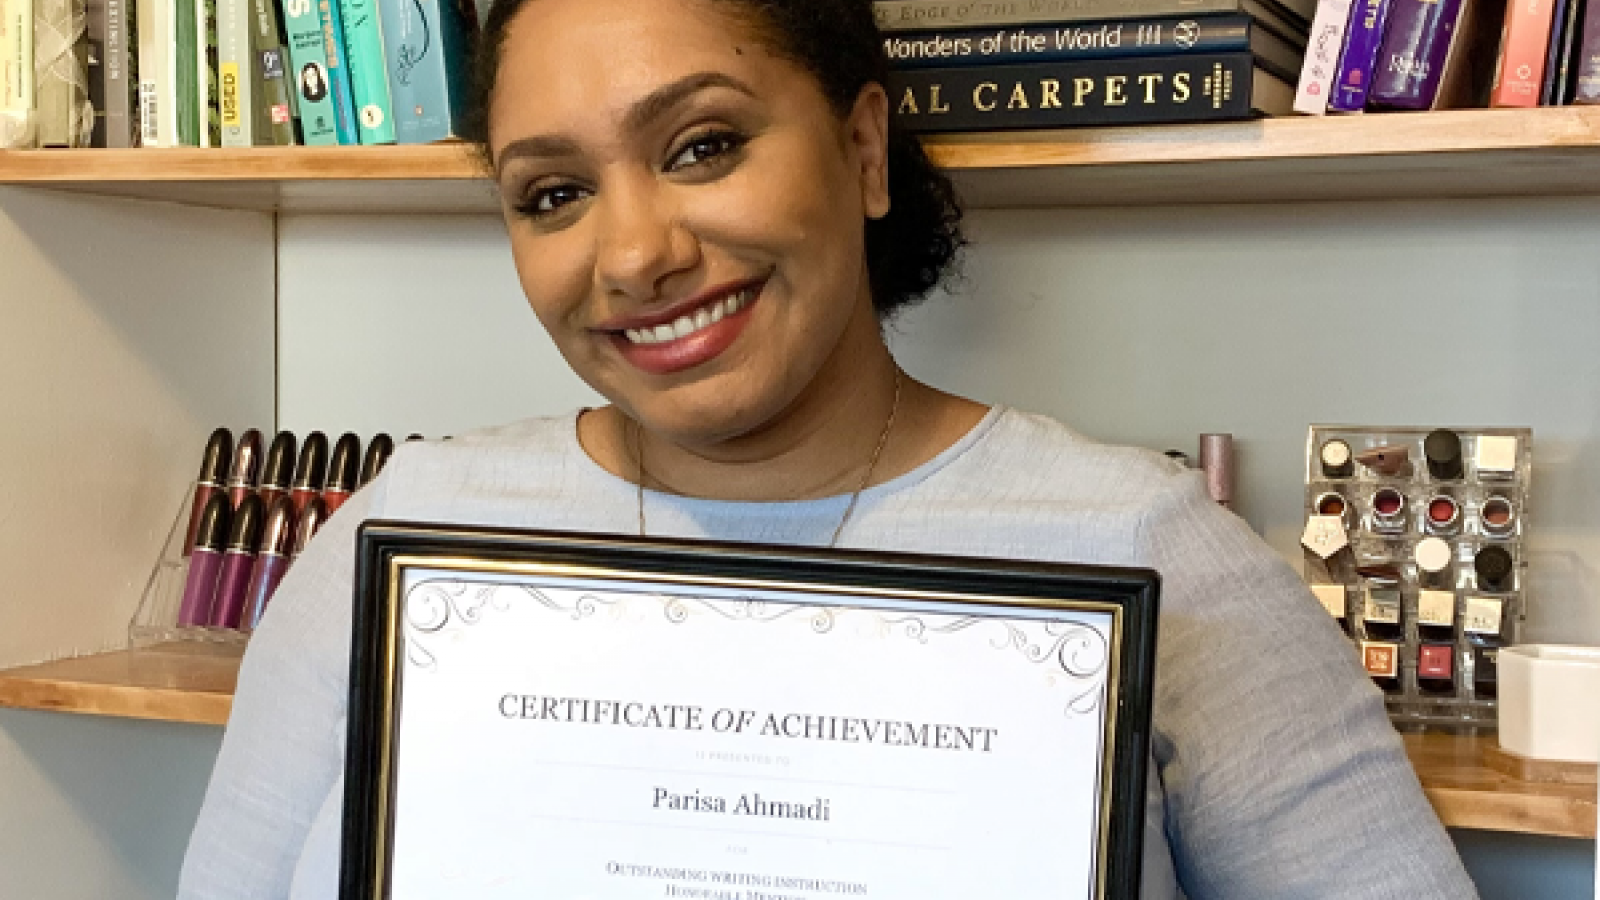 Parisa Ahmadi, honorable mention for the 2020-2021 WAC Outstanding Writing Instruction Award, holding her award certificate in front of bookshelves